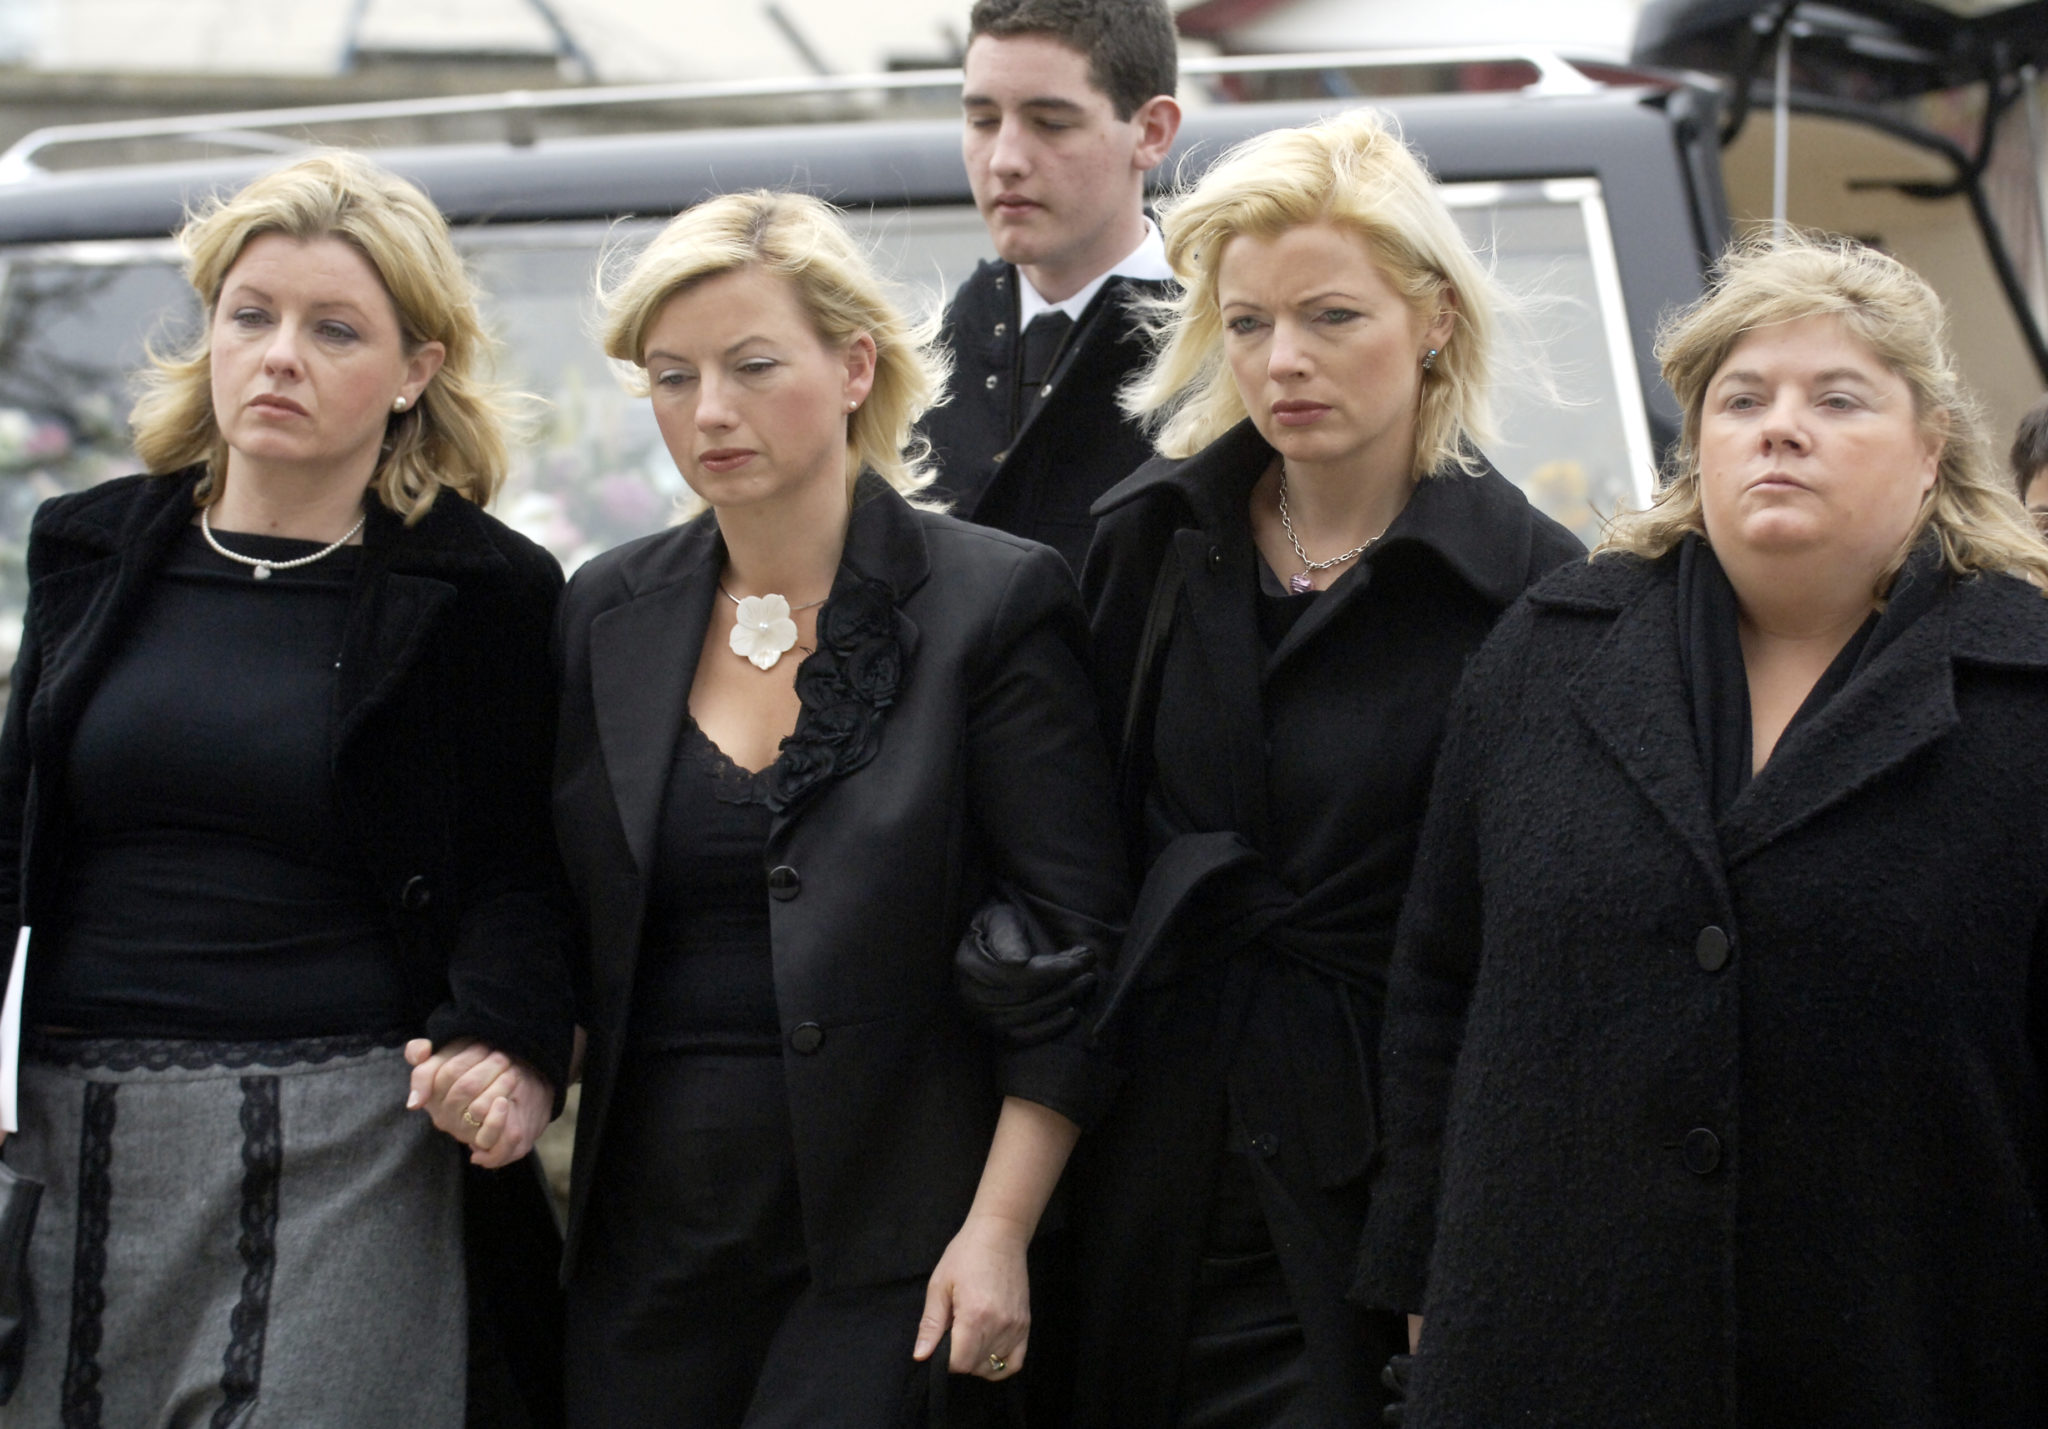 McLaughlin Sisters Caroline, Niamh, Brighid and Aishling at the funeral of their sister Siobhán.